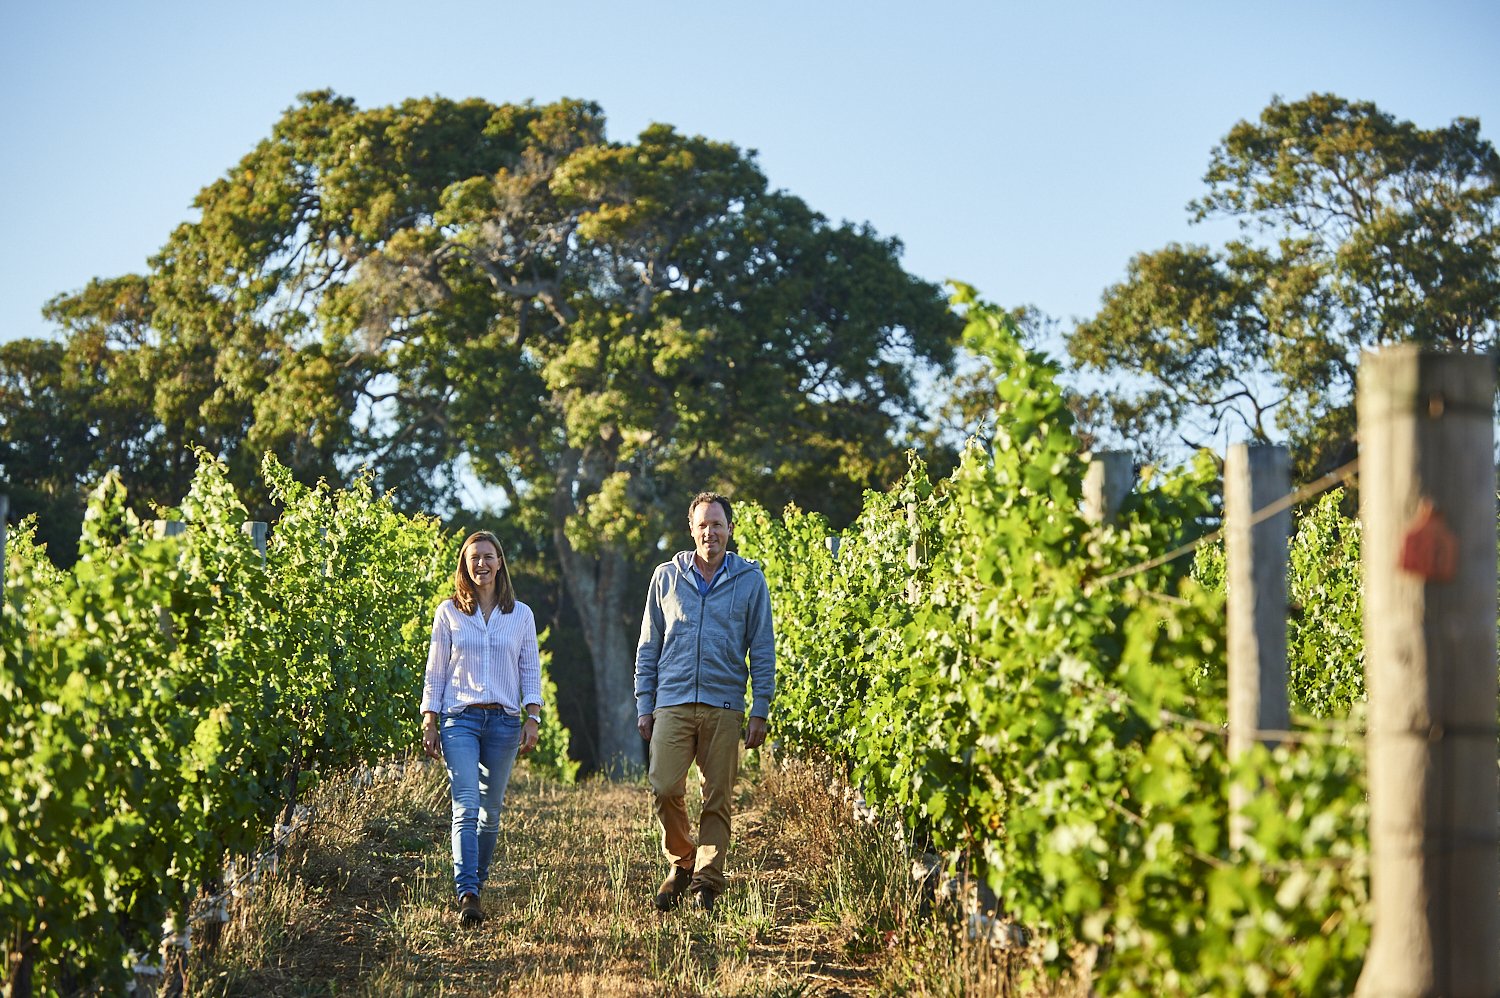 Robert and Genevieve Mann. We’re husband and wife, heads and hearts of Corymbia, and part of one of the oldest and most influential families in the winemaking industry.